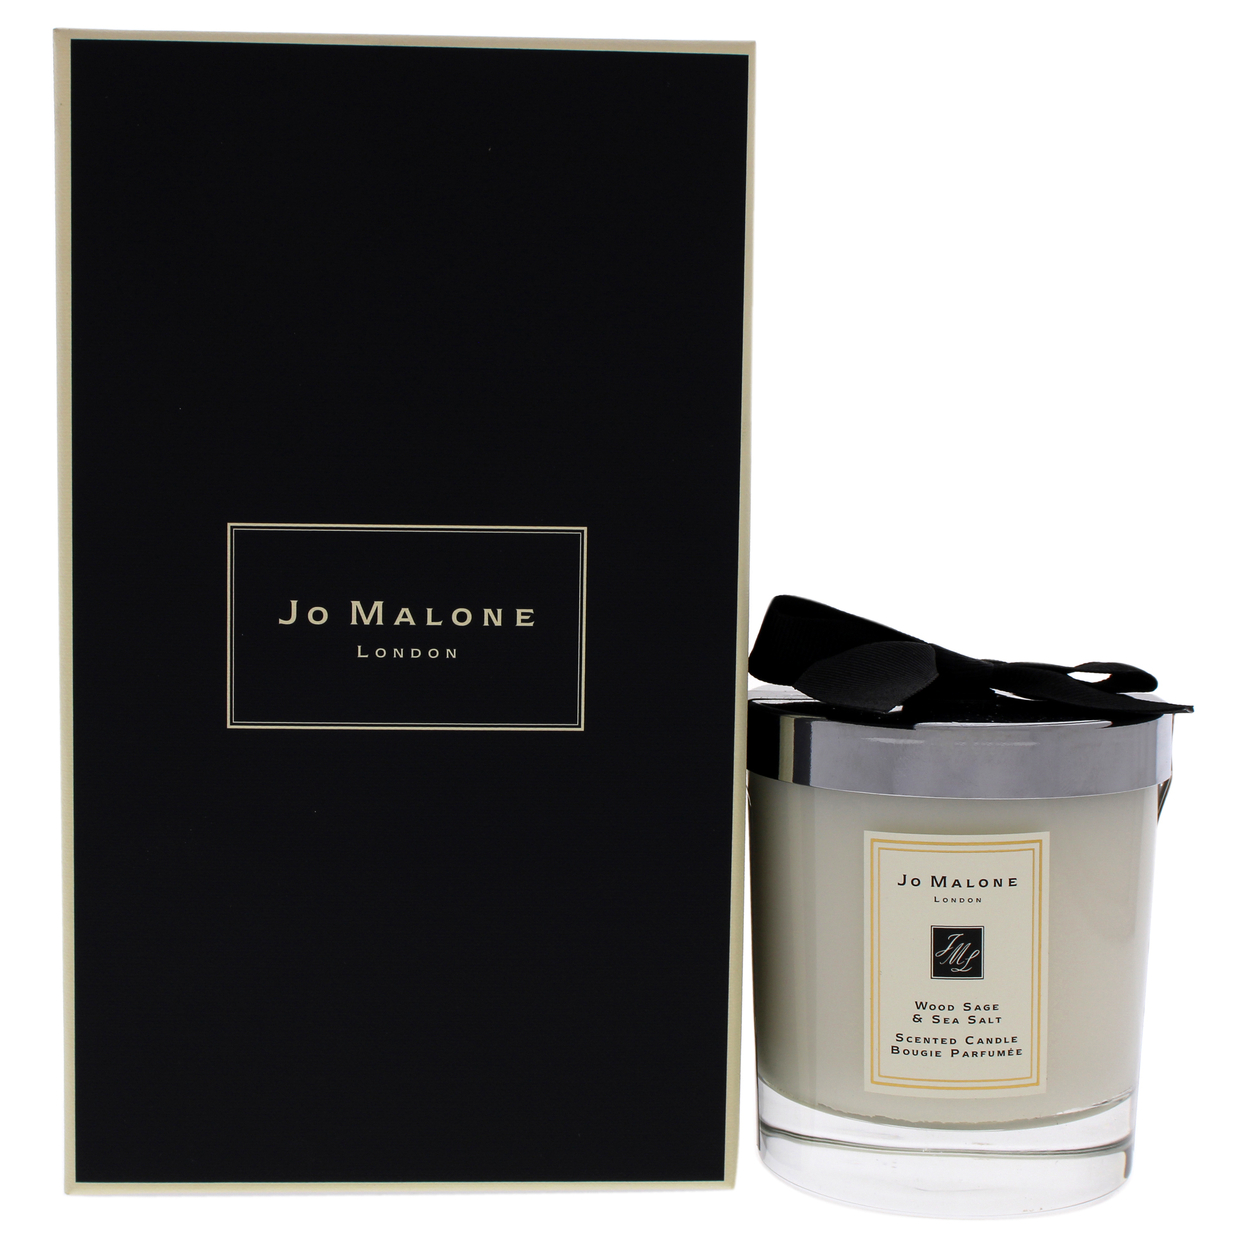 Jo Malone Unisex CANDLES Wood Sage And Sea Salt Scented Candle 7.1 Oz